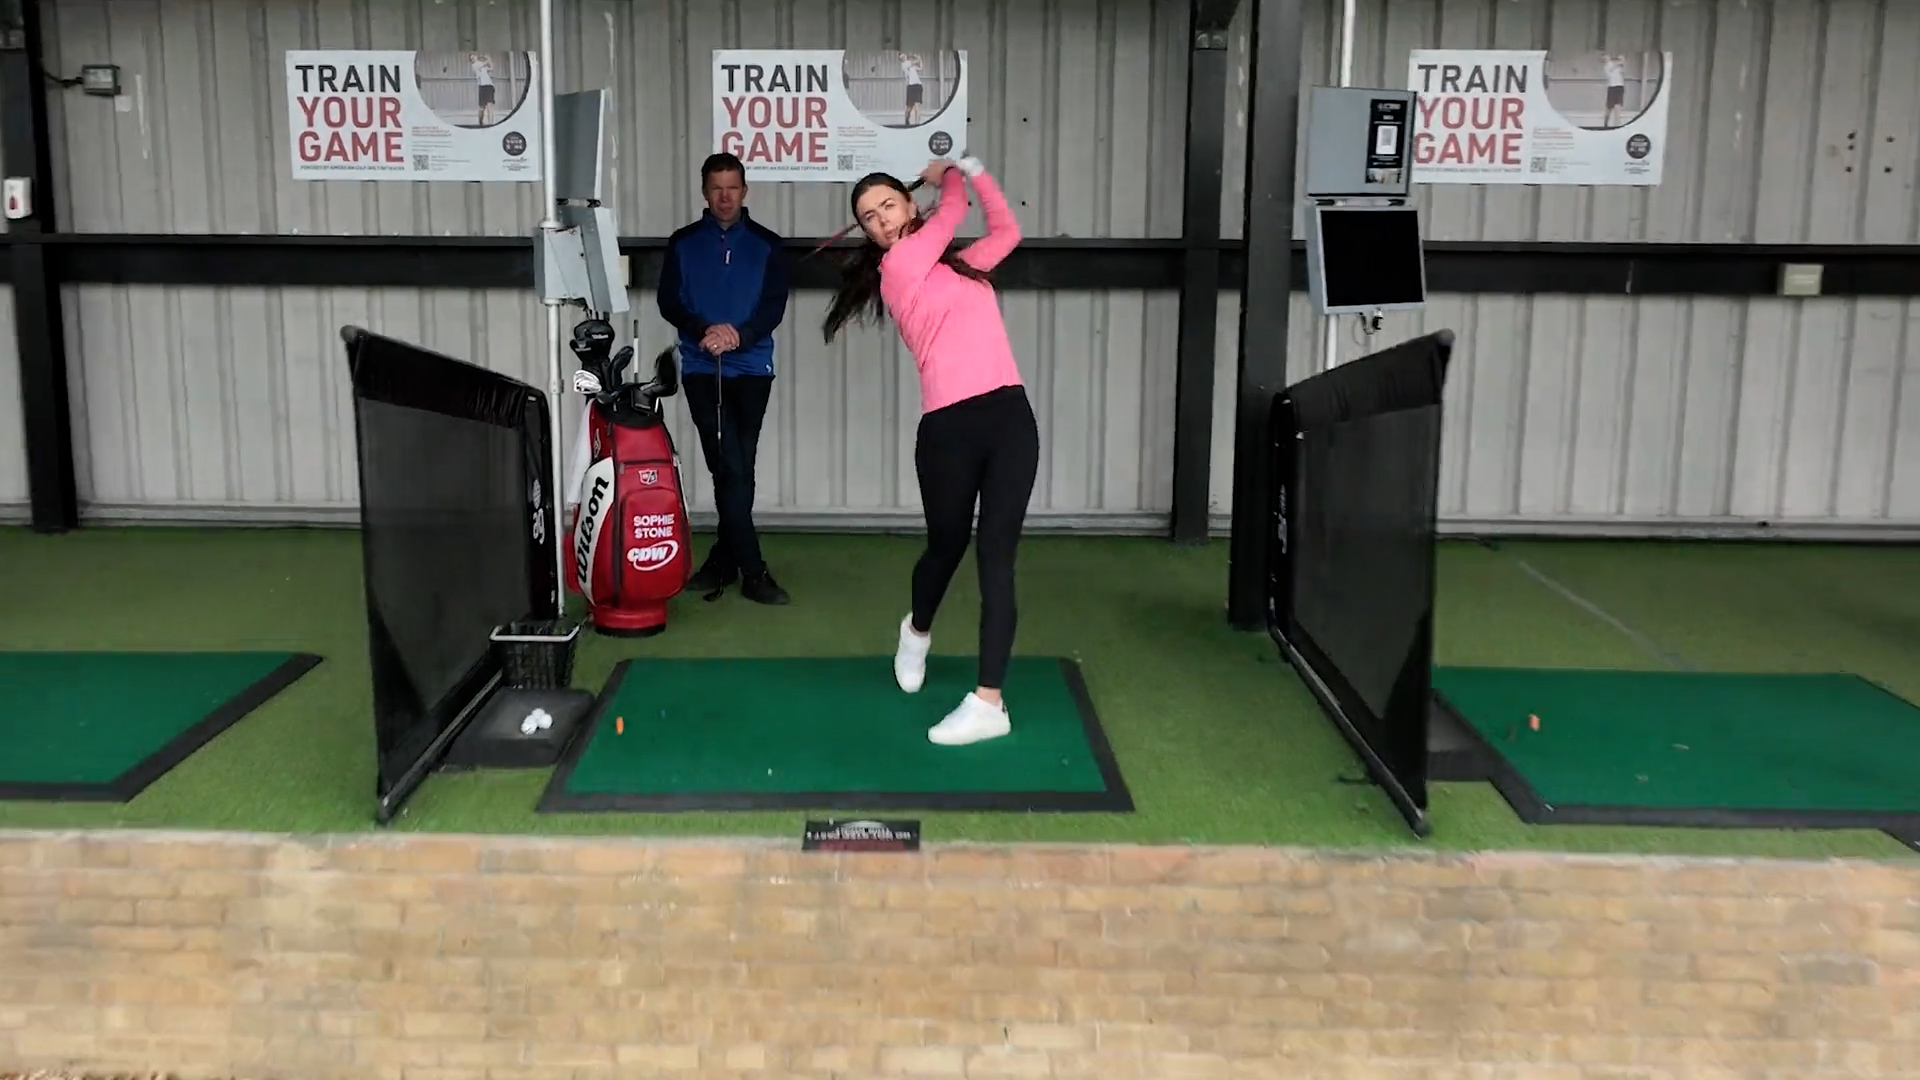 Sophie Stone Profesional Golfer tees of Train Your Game